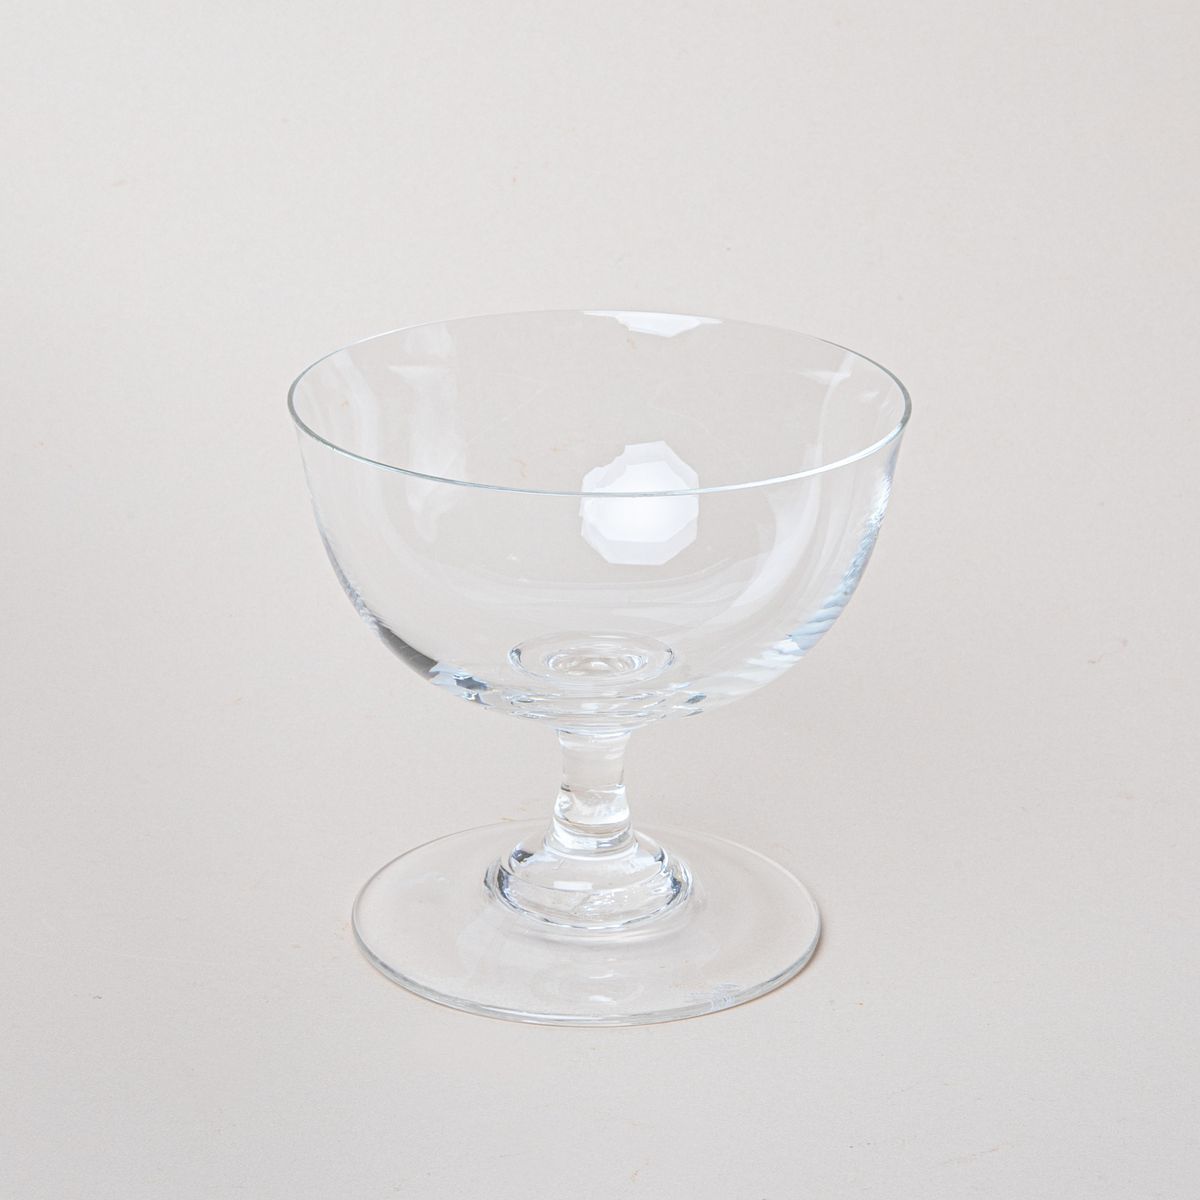 A clear coupe glass with a short stem and wide base